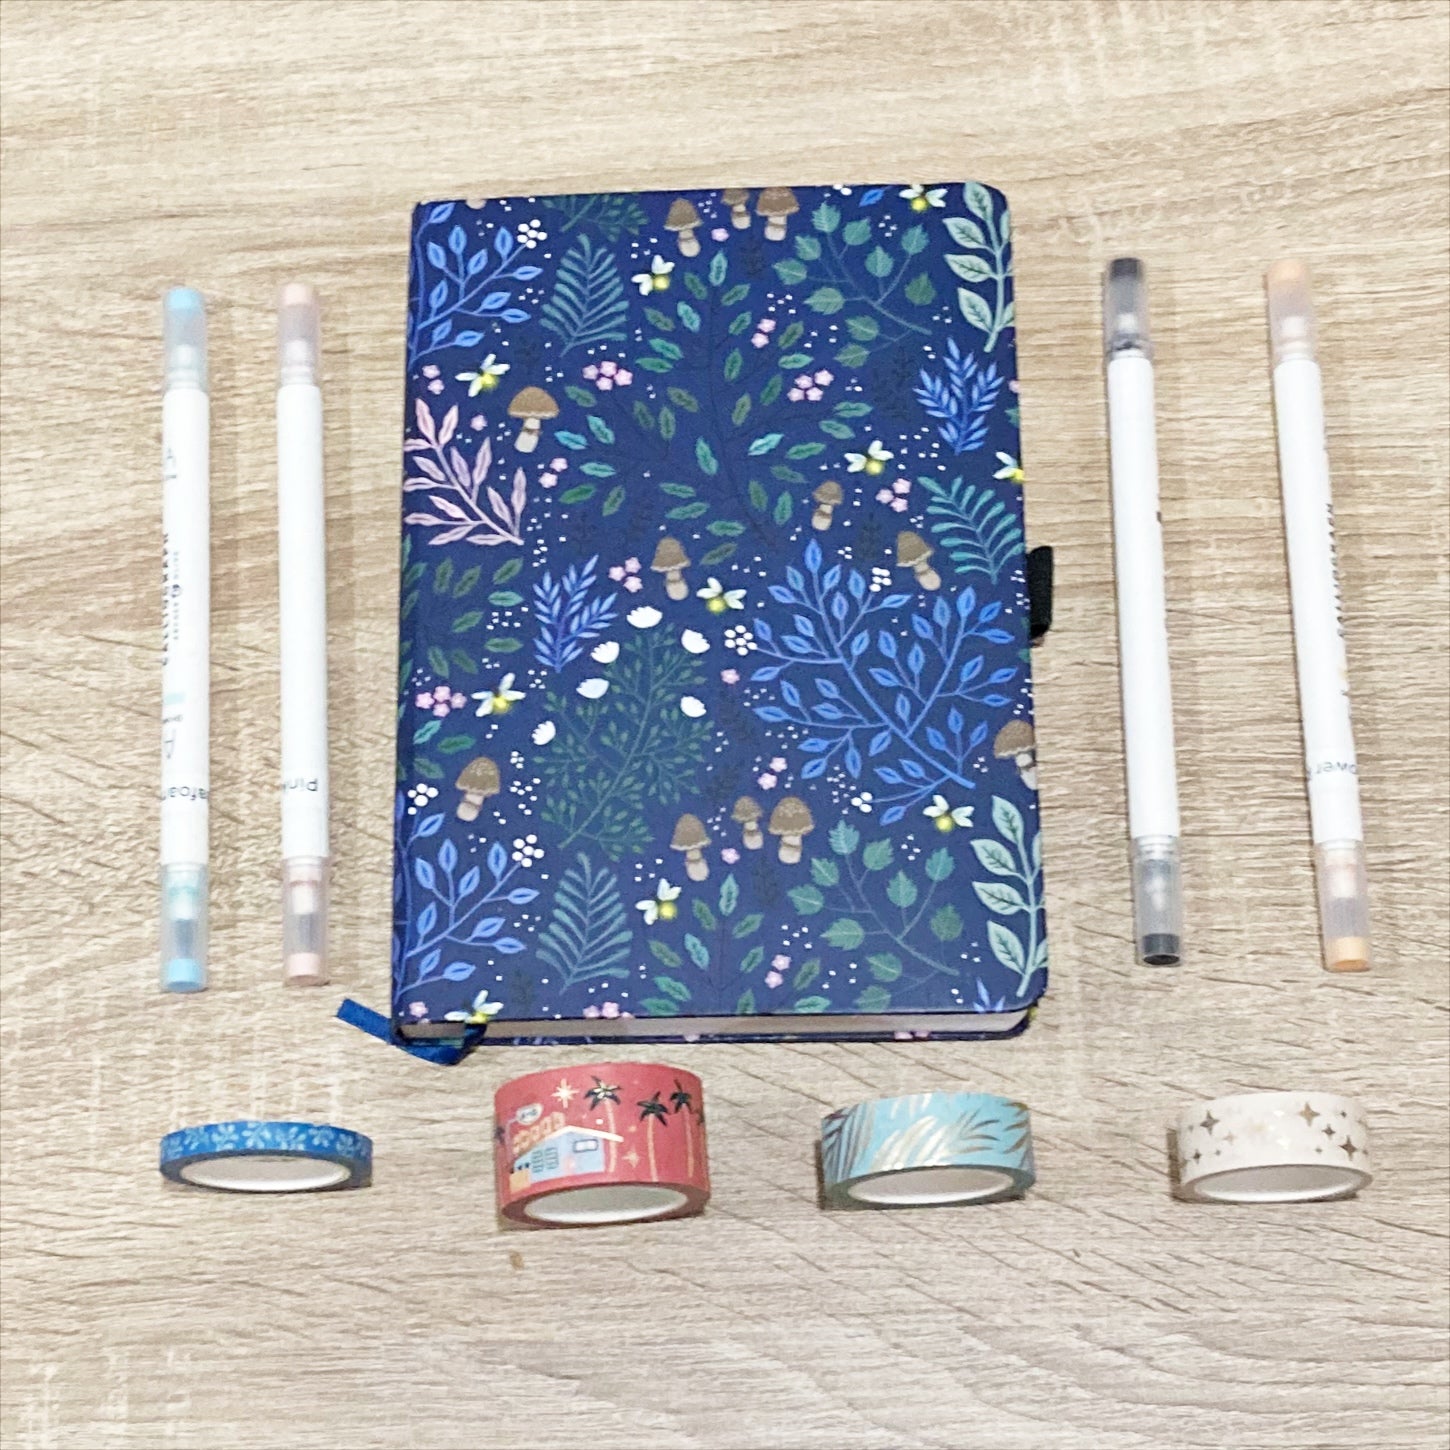 Supplies for project - notebook, calliographs, and washi tape